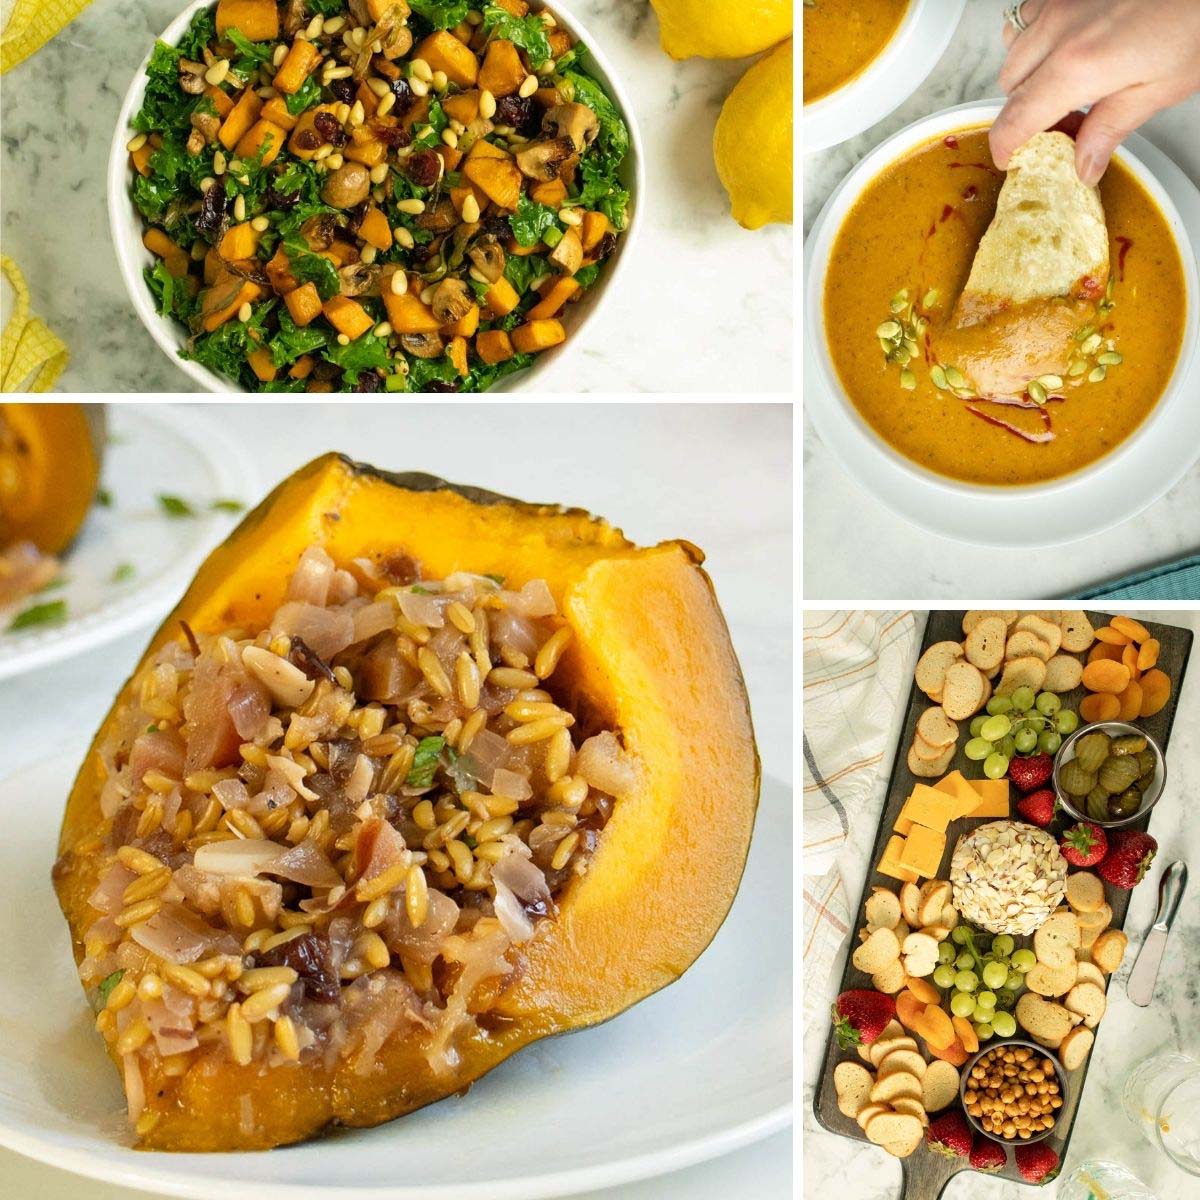 image collage of vegan holiday recipes: salad, soup, stuffed squash, and a vegan cheese board